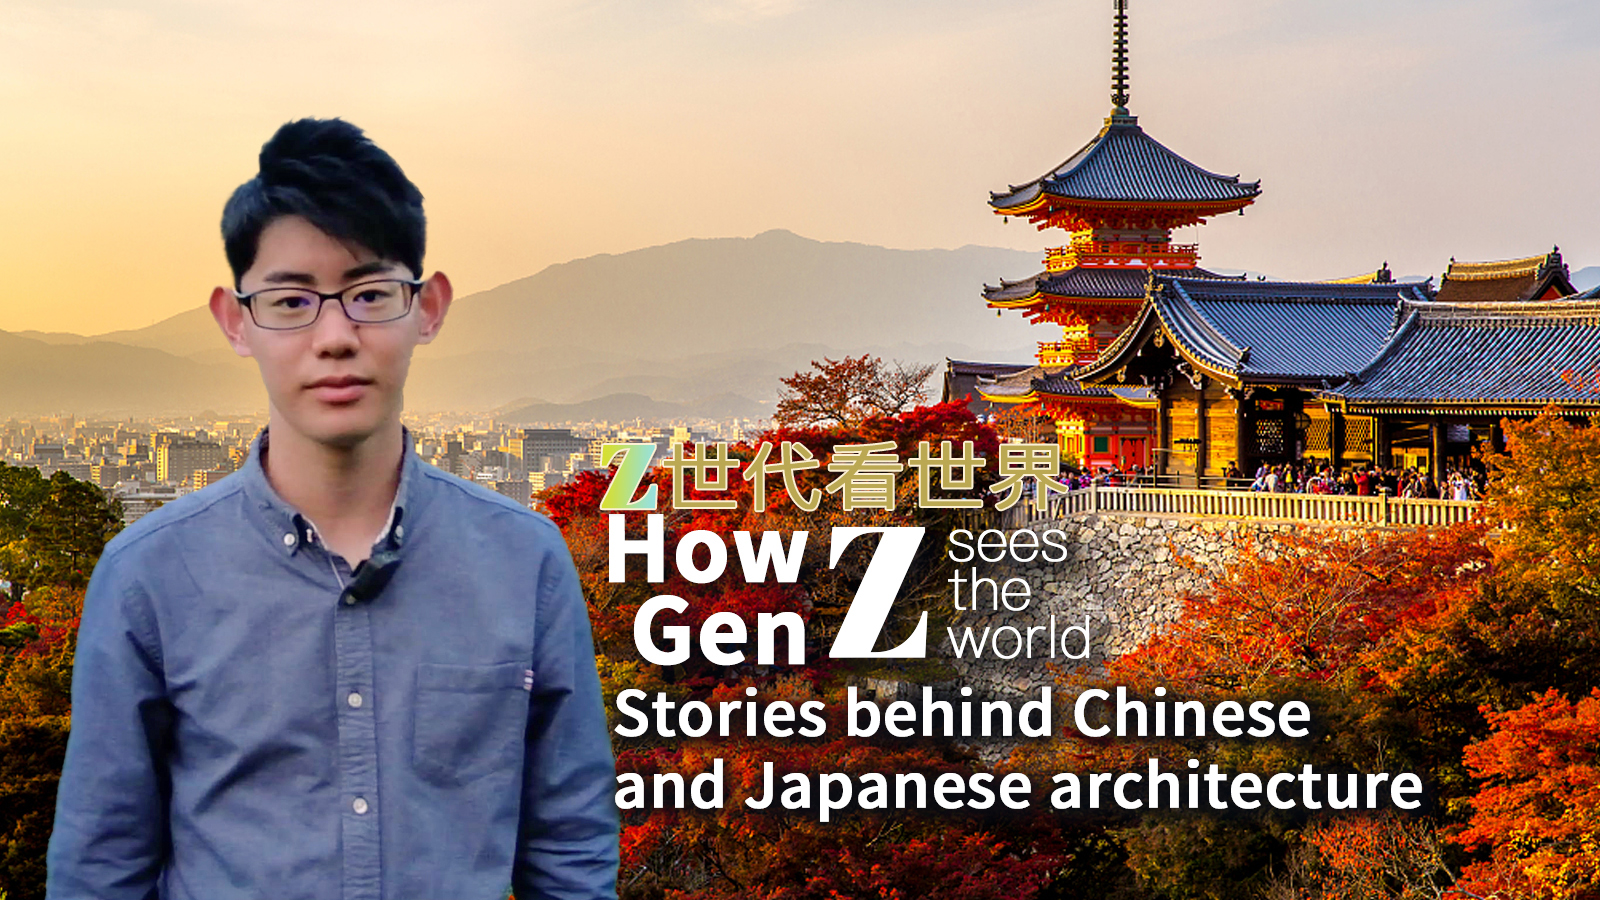 'We Talk': Gen Z on stories behind Chinese and Japanese architecture